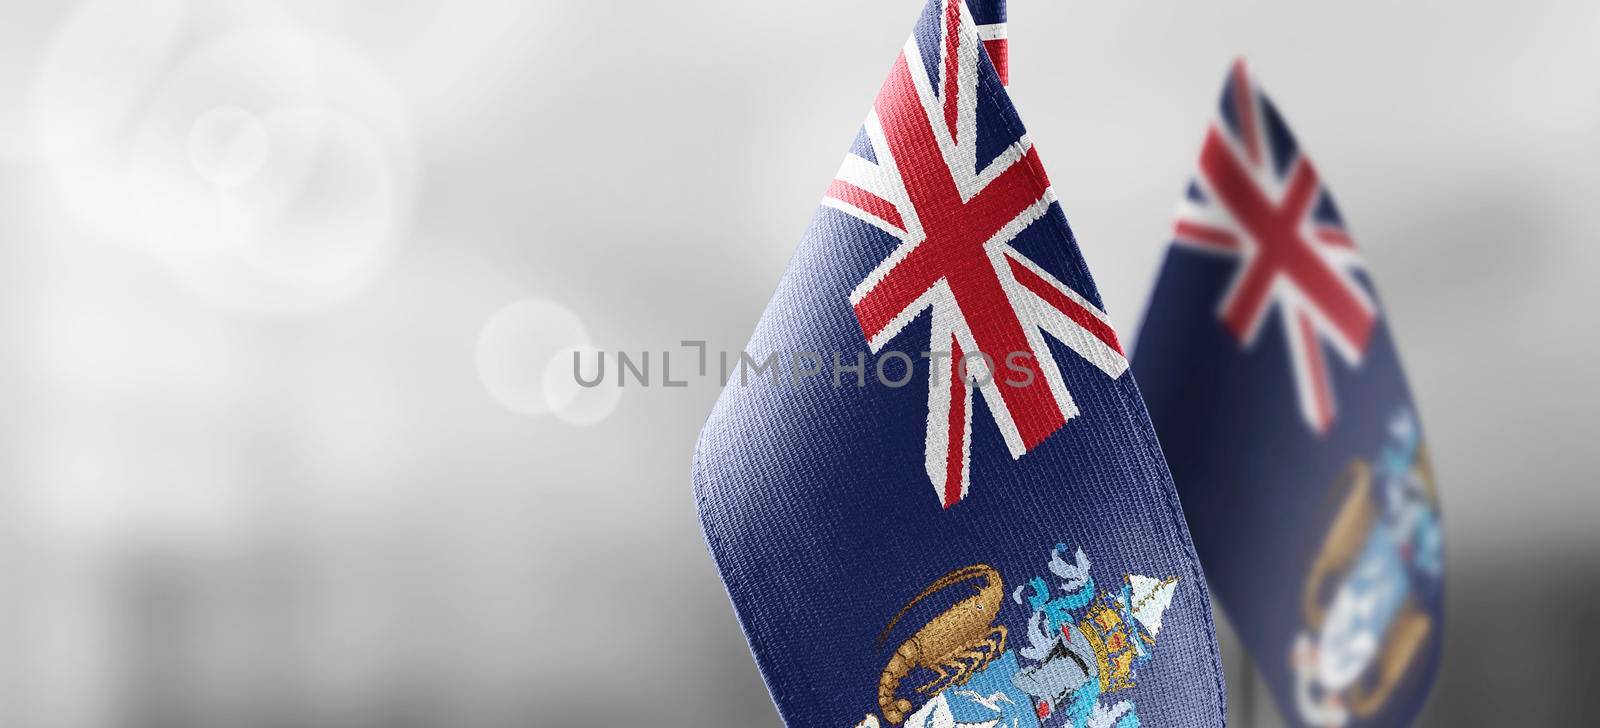 Patch of the national flag of the Tristan da Cunha on a white t-shirt.